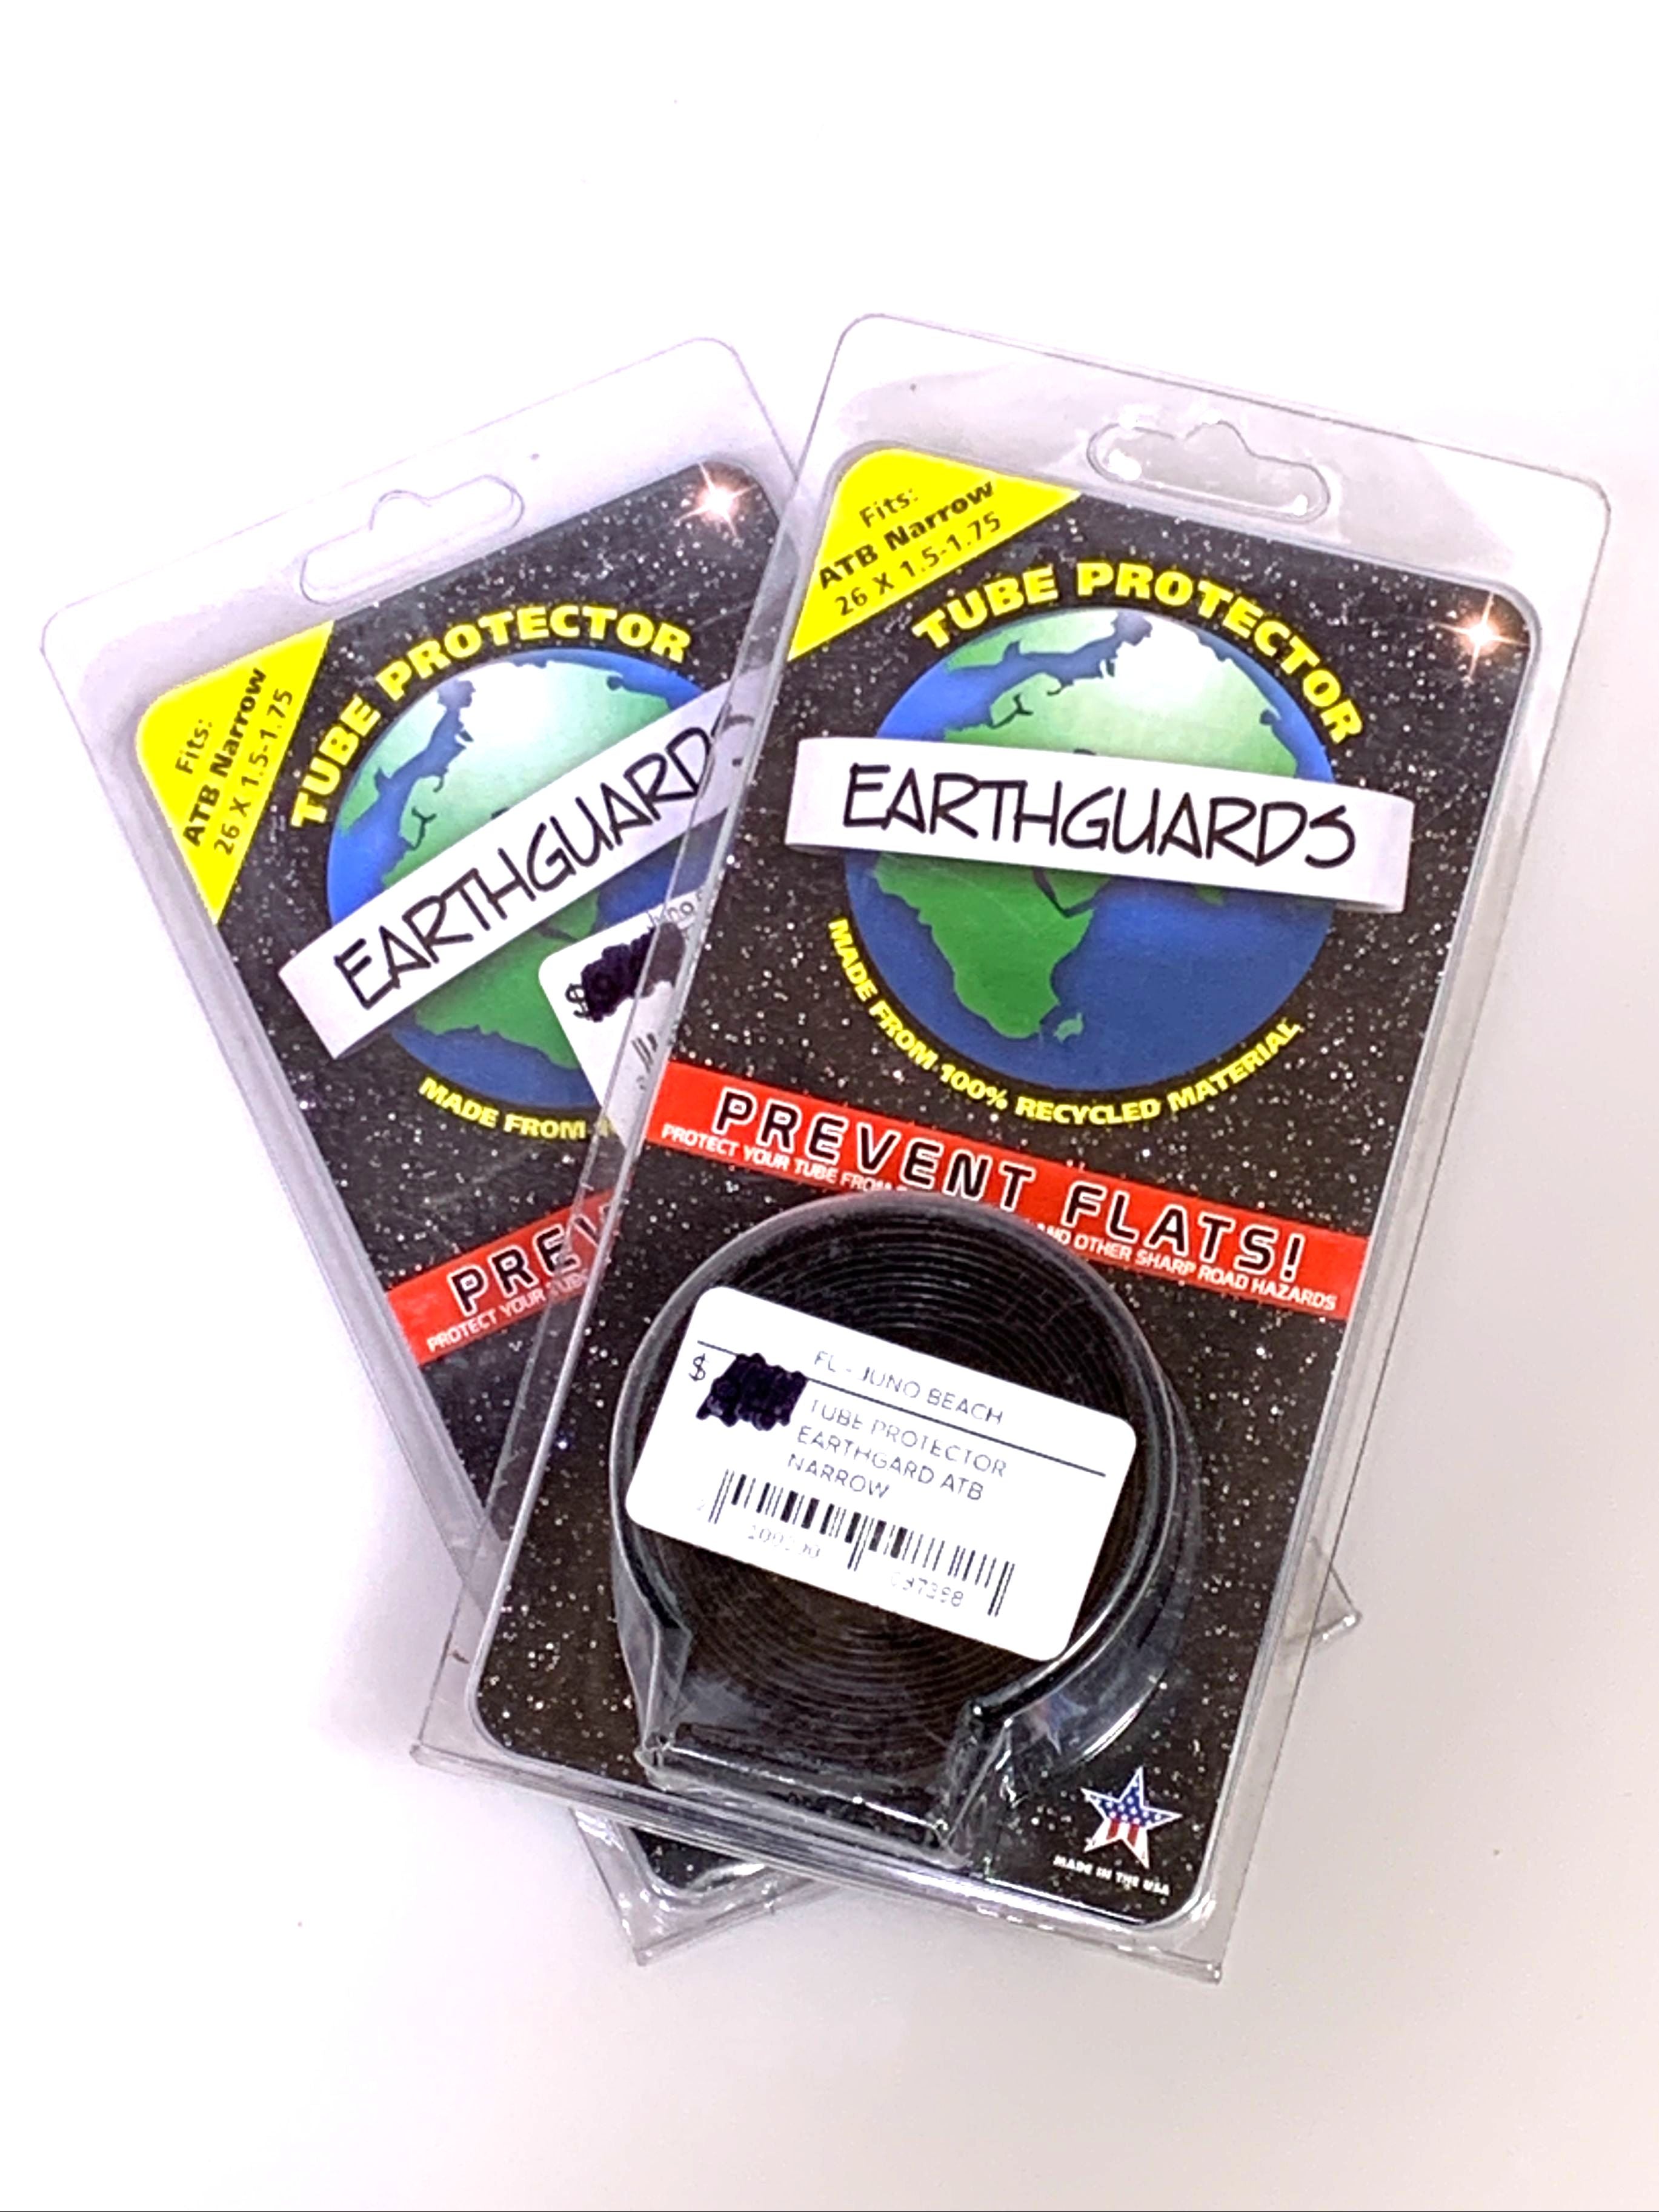 Lot of 2 Earthguards BMX 26" x 1.5-1.75" Bike Bicycle Tube Protector New